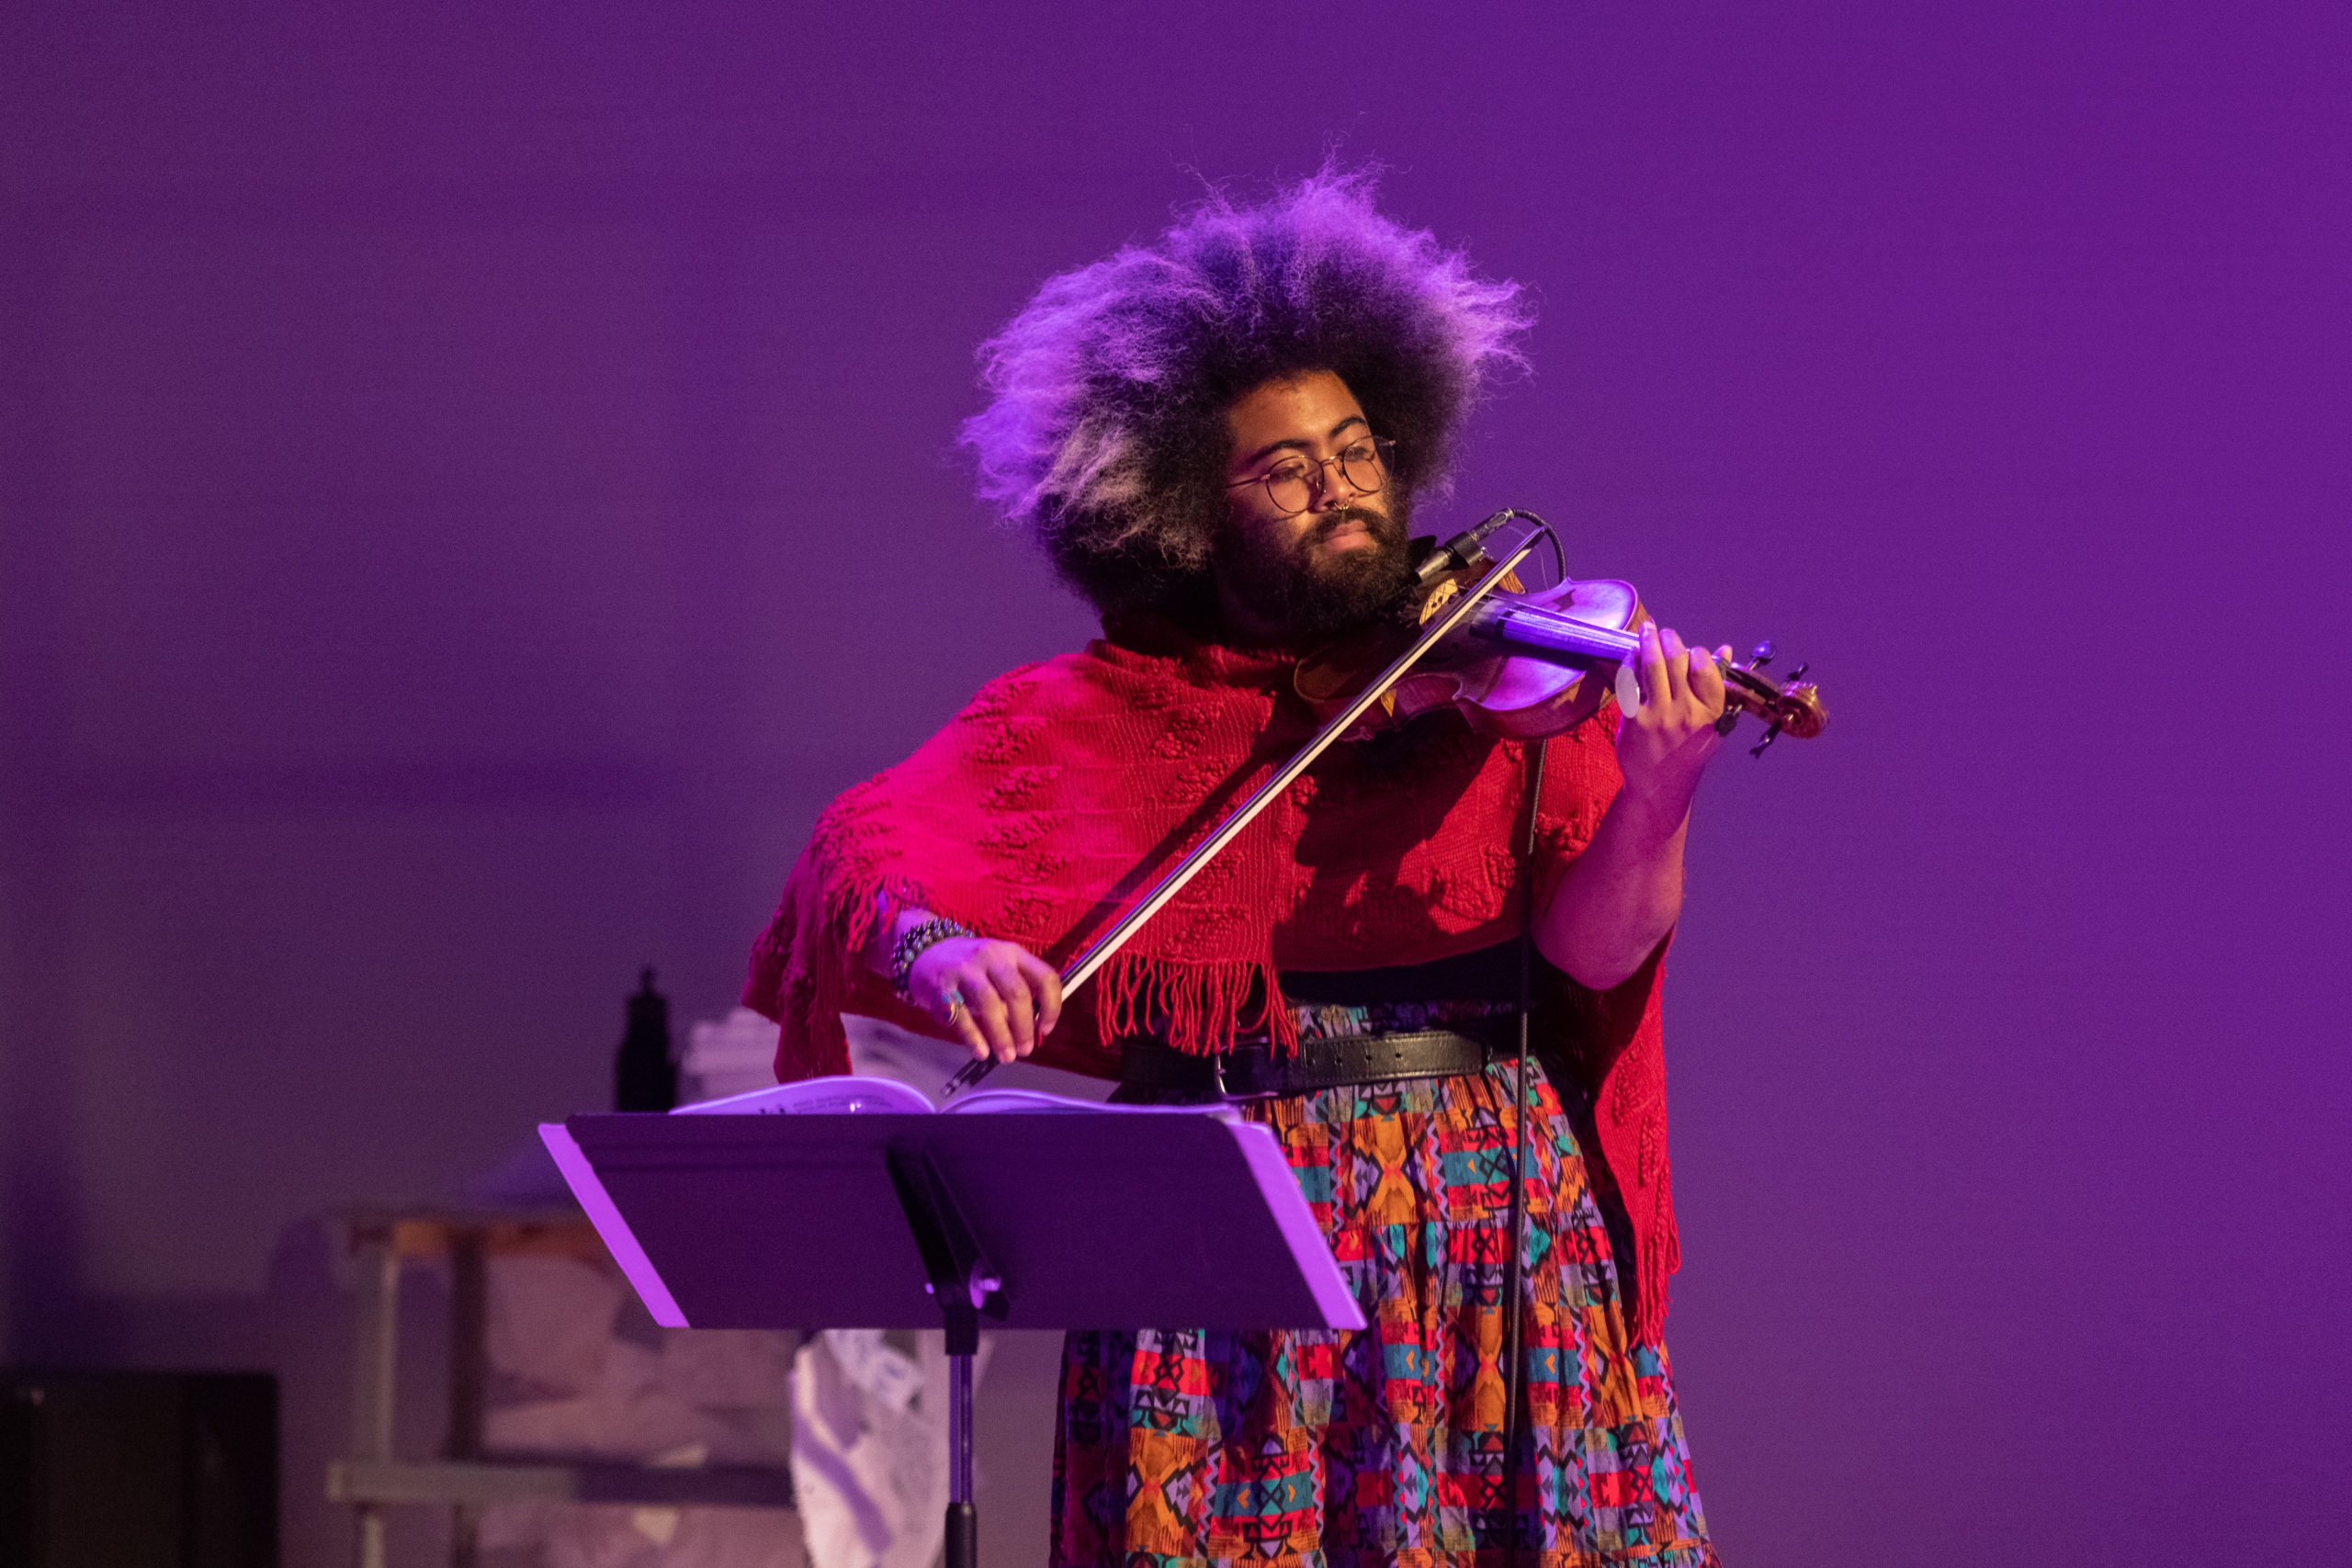 Darian Donovan Thomas performs original music for Doña Mañana. Image by Filip Wolak, courtesy of The Whitney Museum of American Art